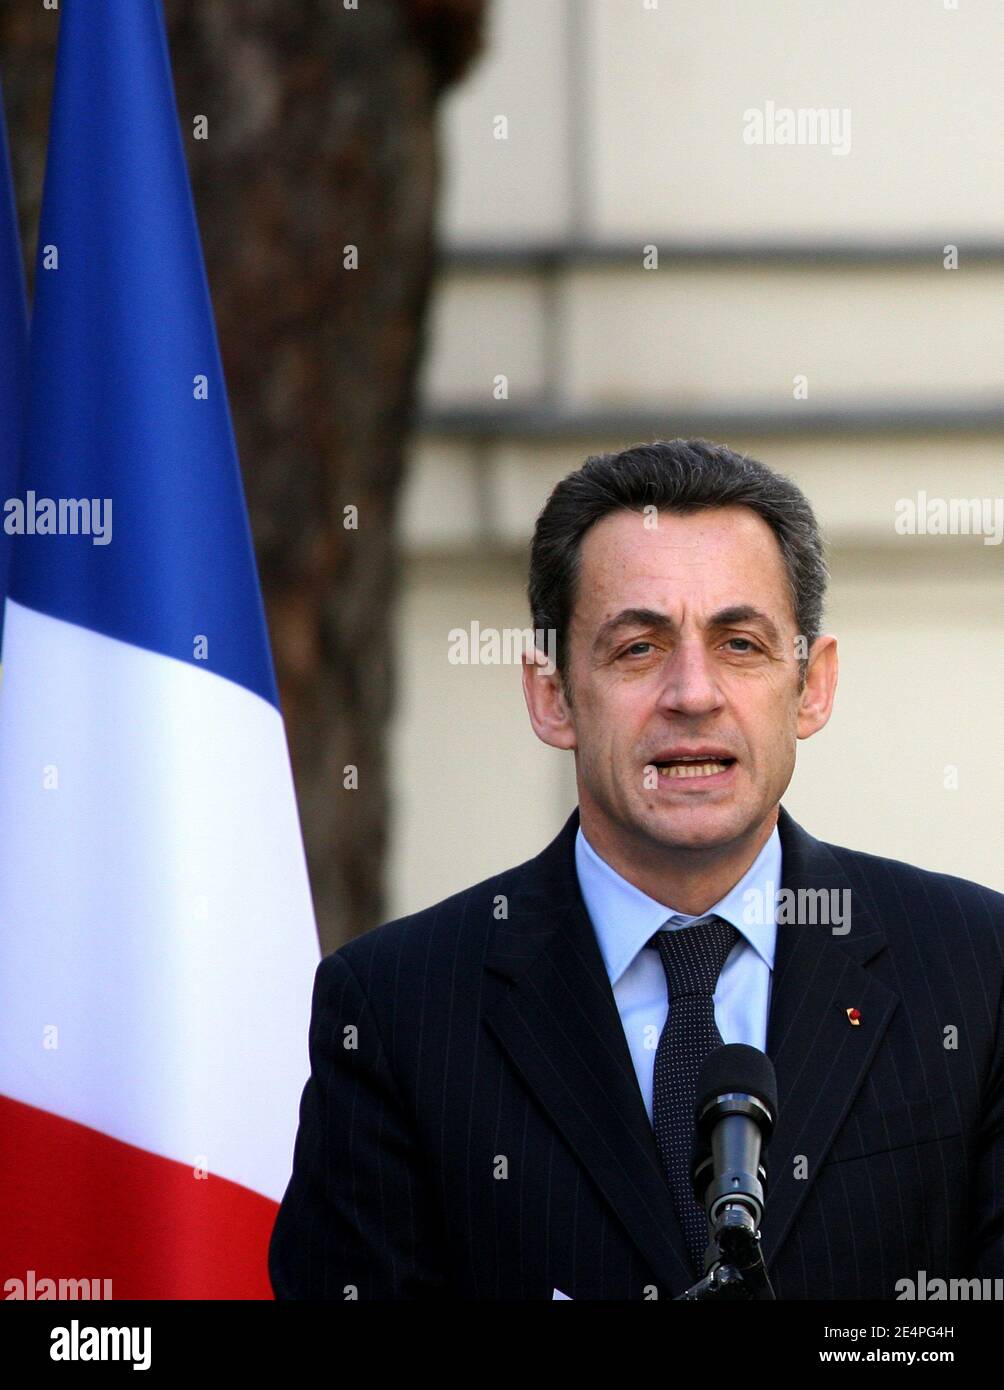 Nicolas Sarkozy during a ceremony Place Beauvau, in memory of Prefect Claude Erignac, who was killed in Corsica in 1998. Paris, France, on February 6, 2008. Photo by Mousse-Taamallah/ABACAPRESS.COM Stock Photo